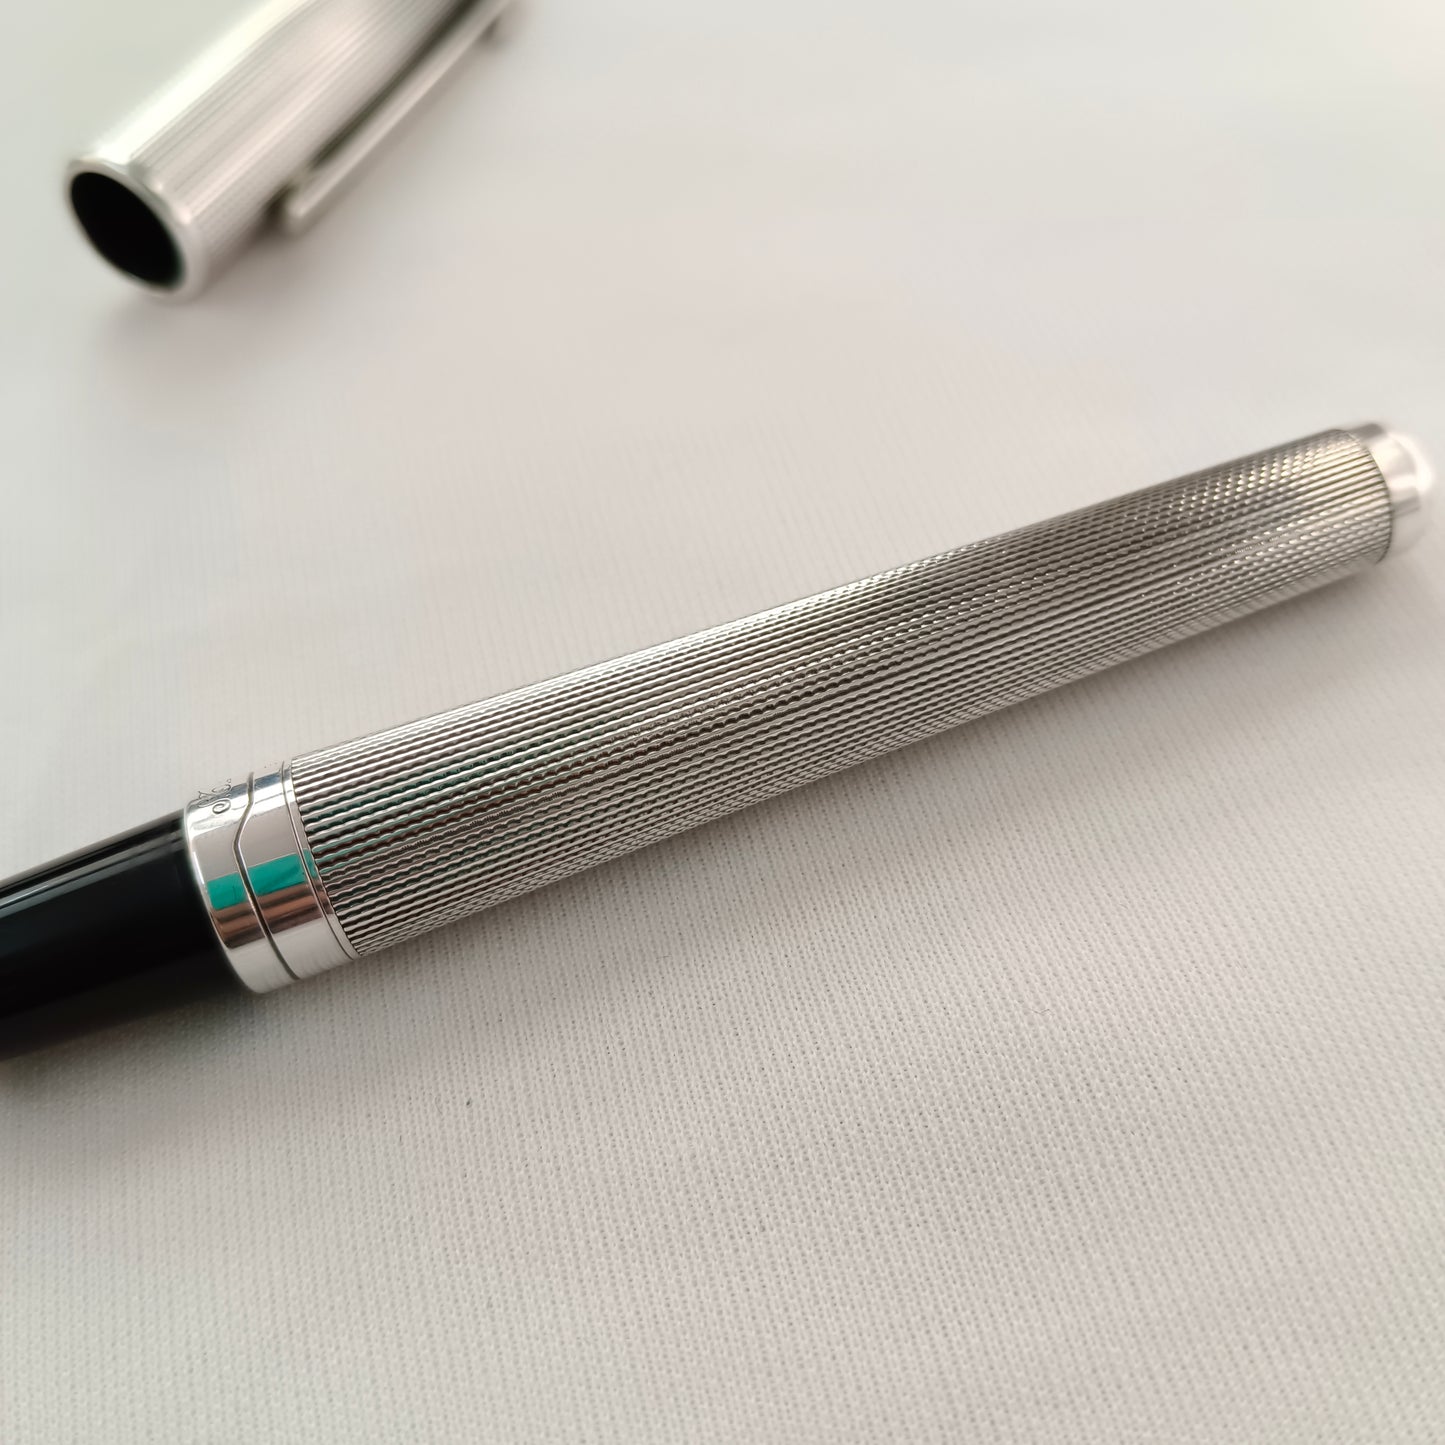 S.T. Dupont Orpheo Olympio 480101 Silver Plated Fountain Pen